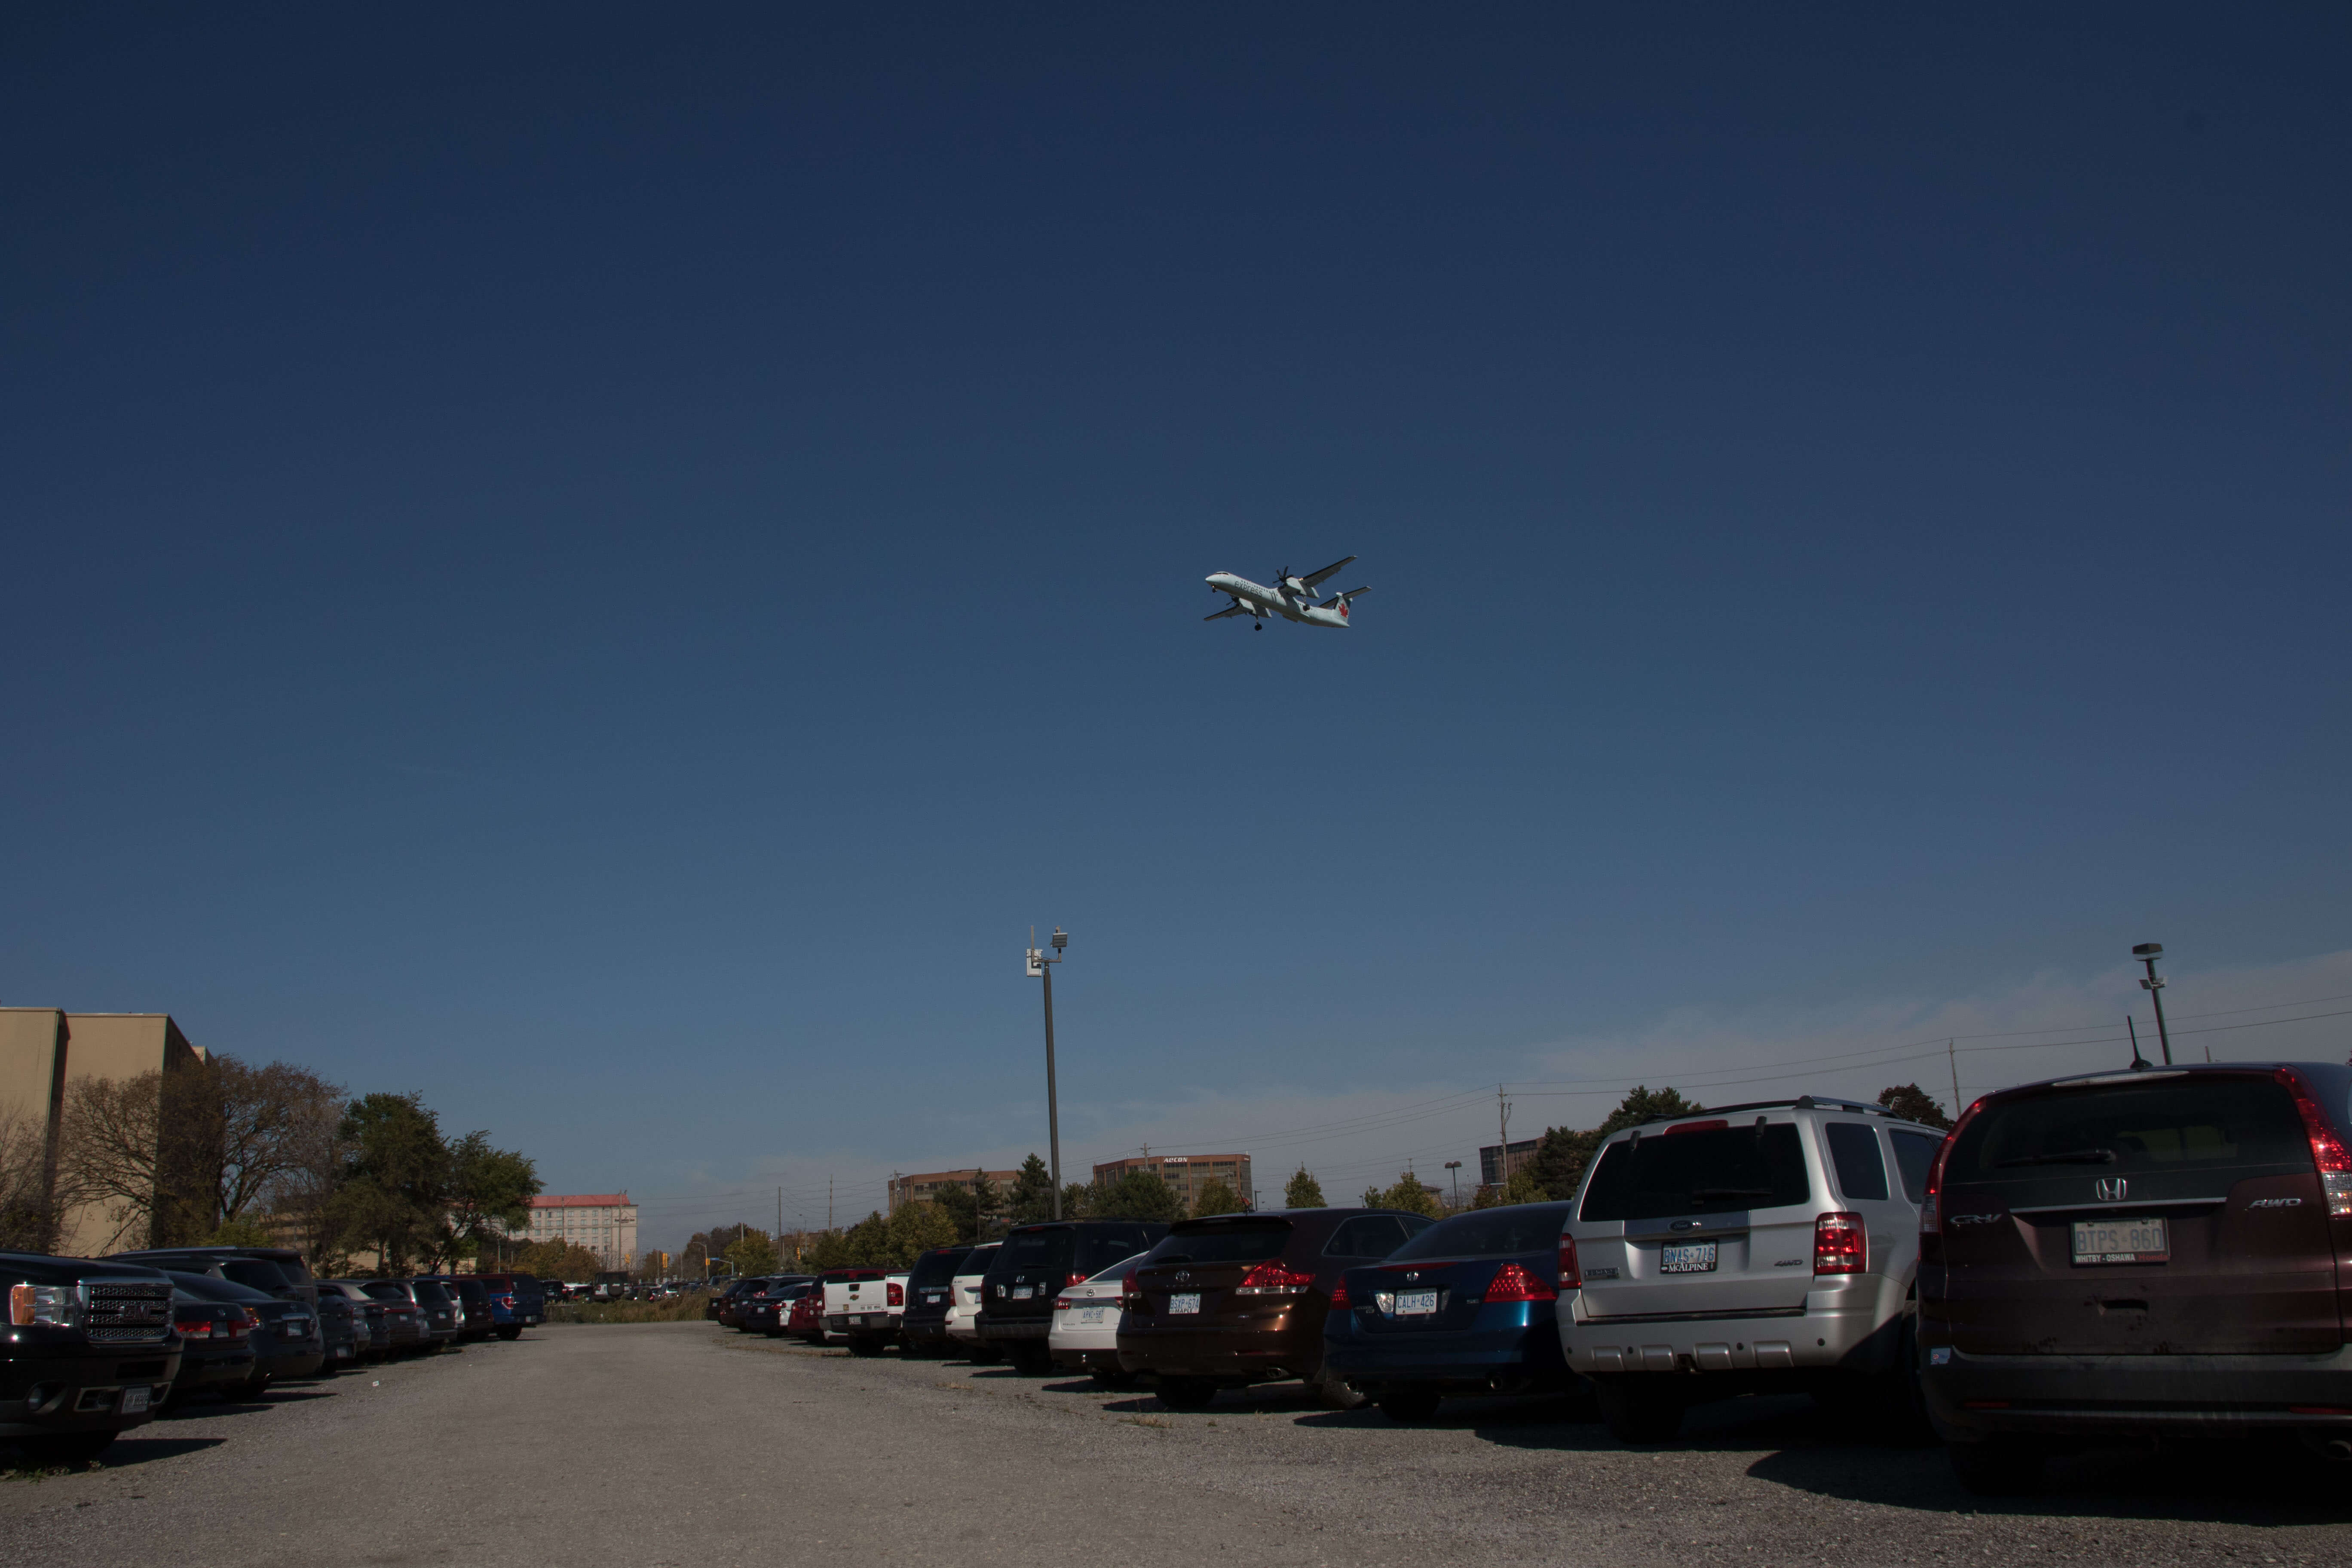 Images/p4p_airplane_over_cars.jpg